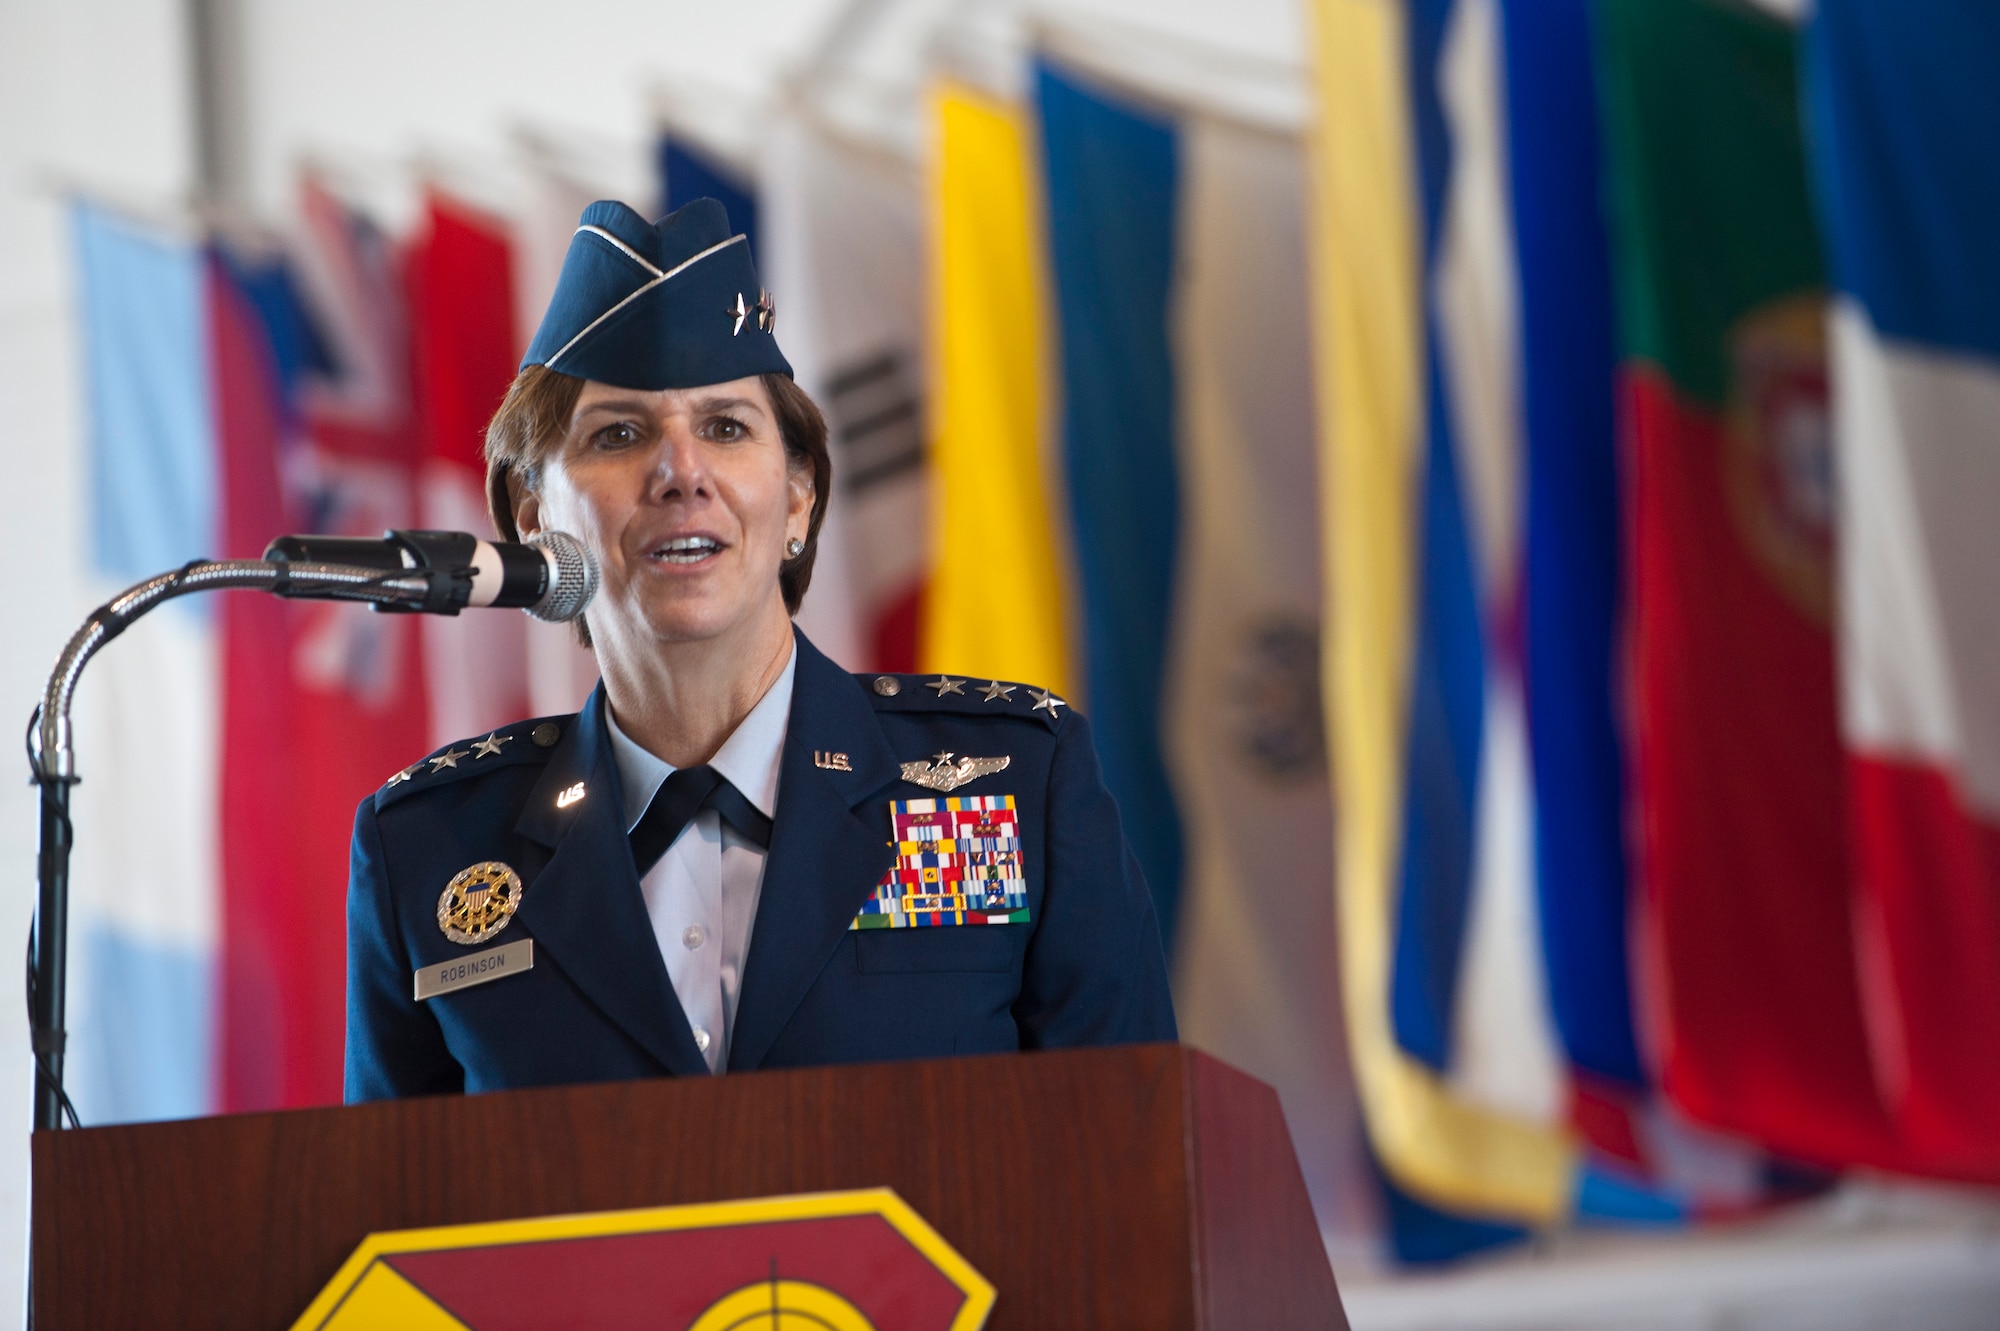 U.S. Air Force Lt. Gen. Lori Robinson, Air Combat Command vice commander, provides opening remarks during an assumption of command ceremony in the Thunderbird hangar Feb. 21, 2014, at Nellis Air Force Base, Nev. Robinson was the presiding official for the assumption of command ceremony. (U.S. Air Force photo by Senior Airman Matthew Lancaster)